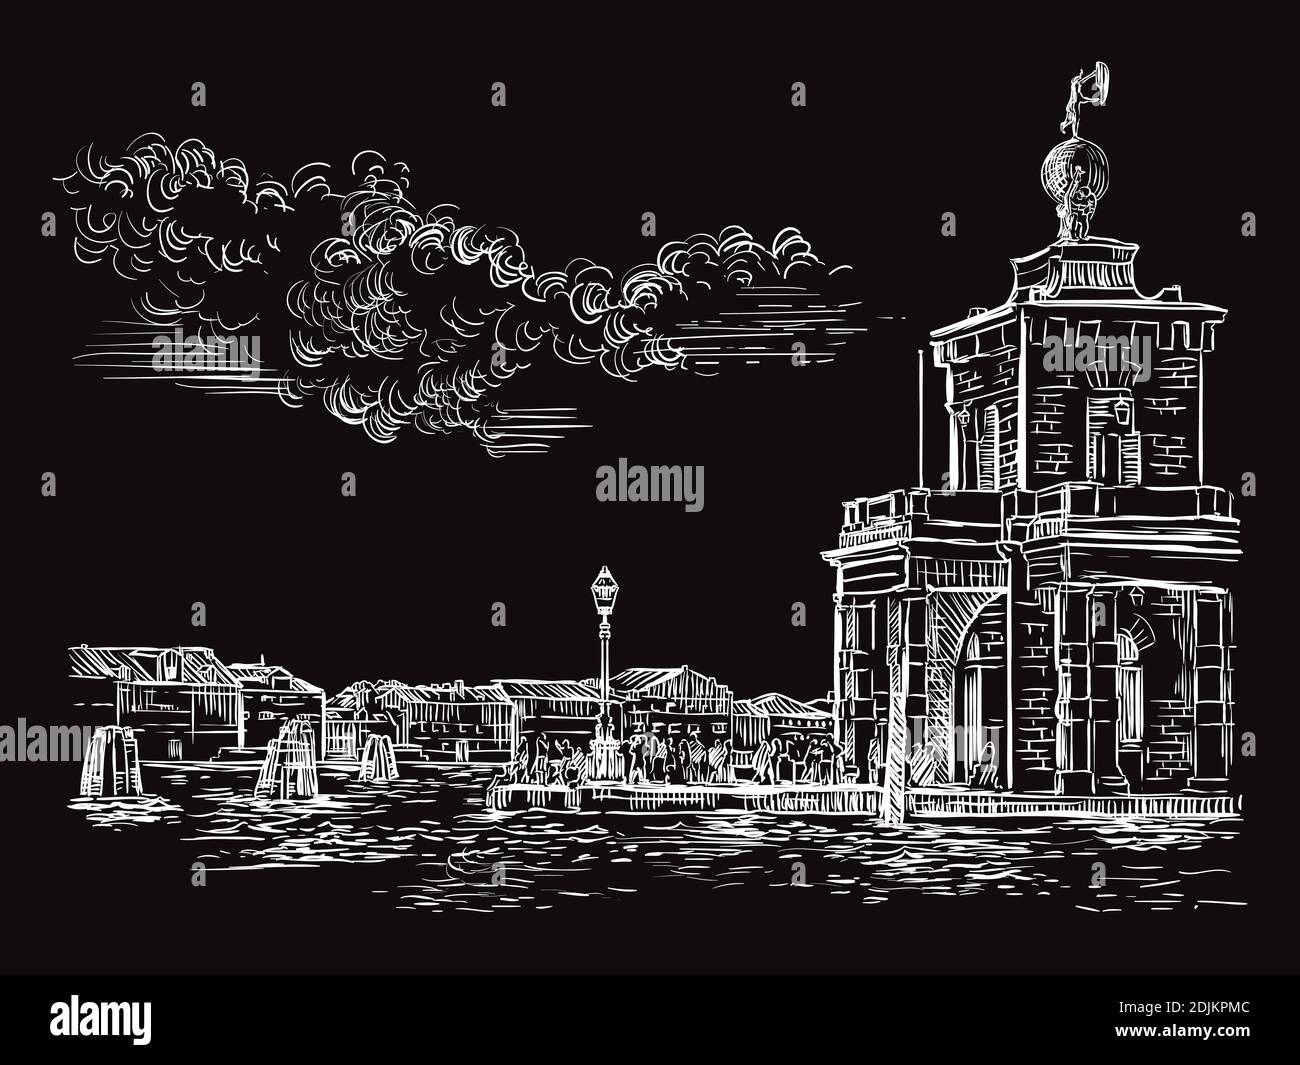 Vector hand drawing sketch illustration of Della Dogane Punta in Venice. Venice skyline hand drawn sketch in white color isolated on black background. Stock Vector